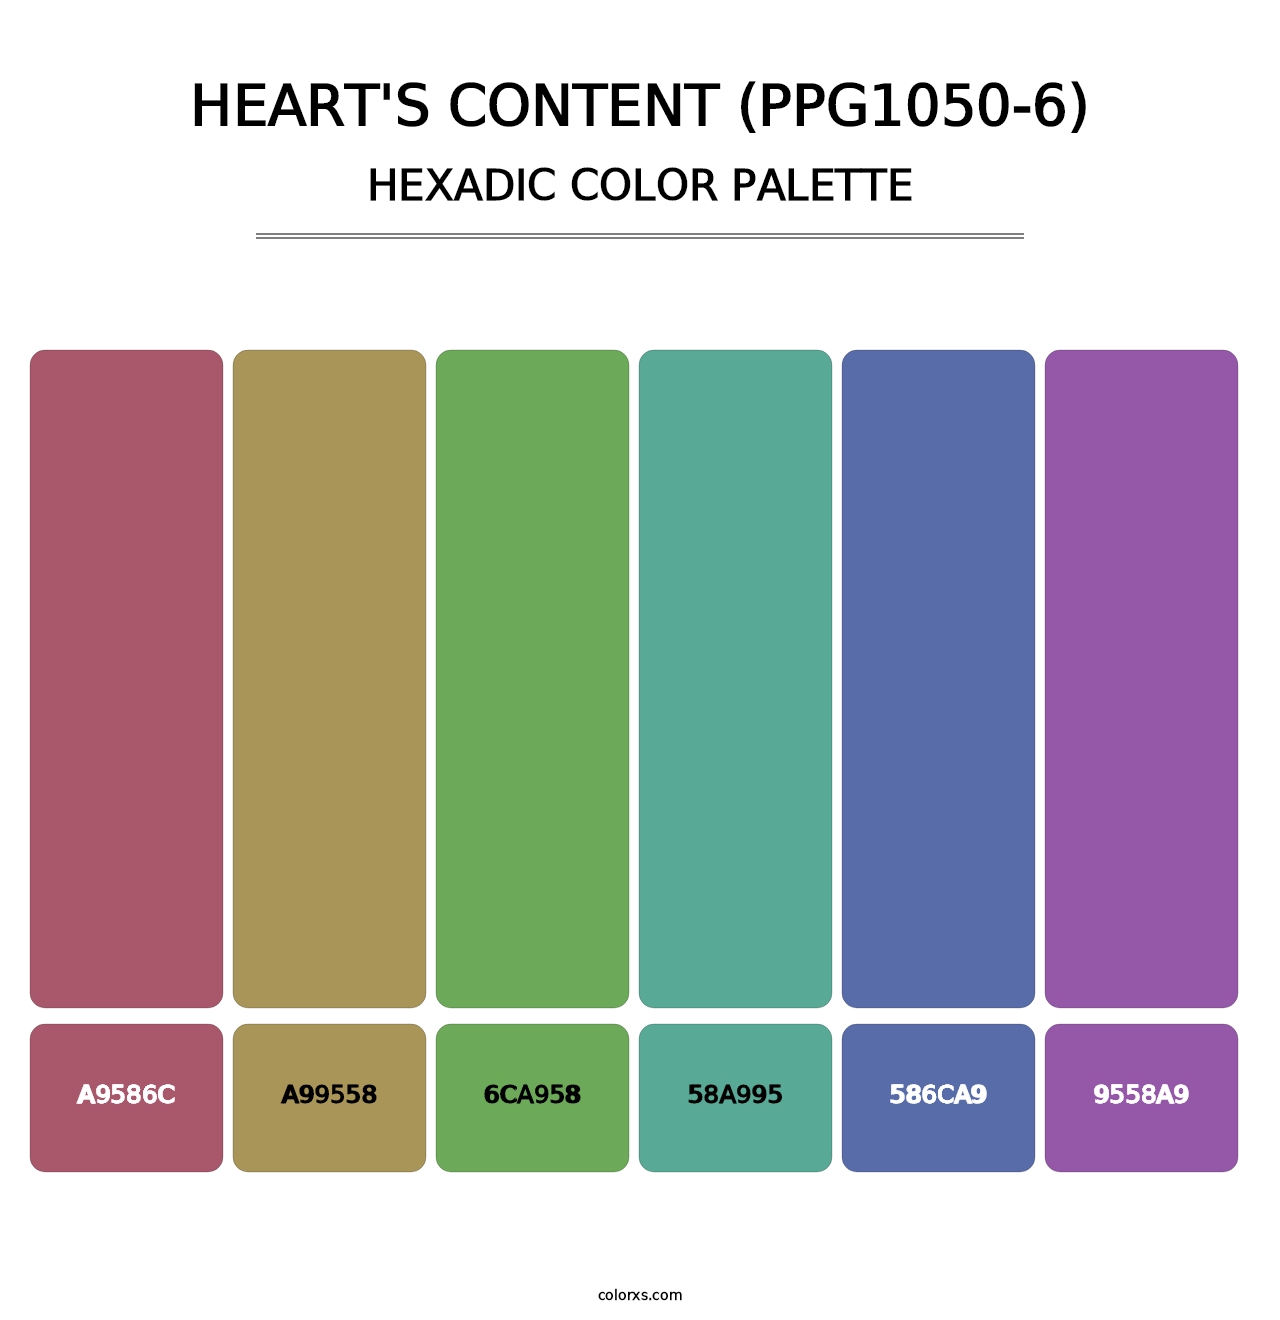 Heart's Content (PPG1050-6) - Hexadic Color Palette